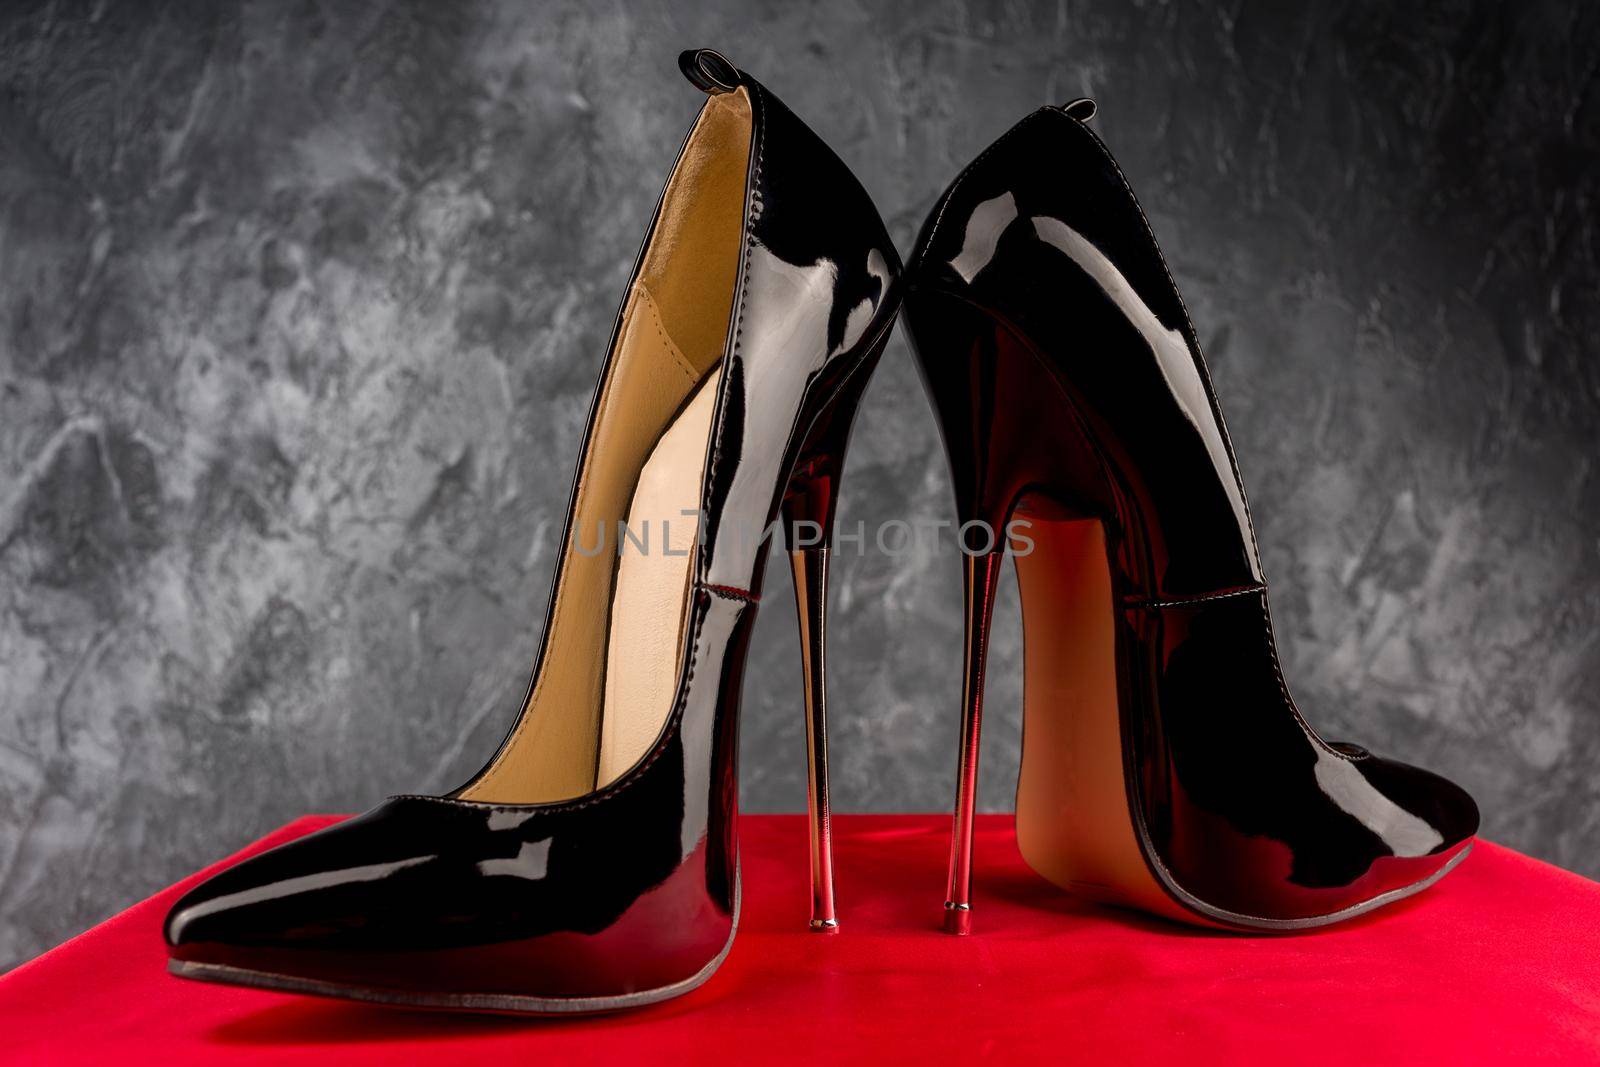 Black fetish shiny patent leather stiletto high heels with ankle strap - image